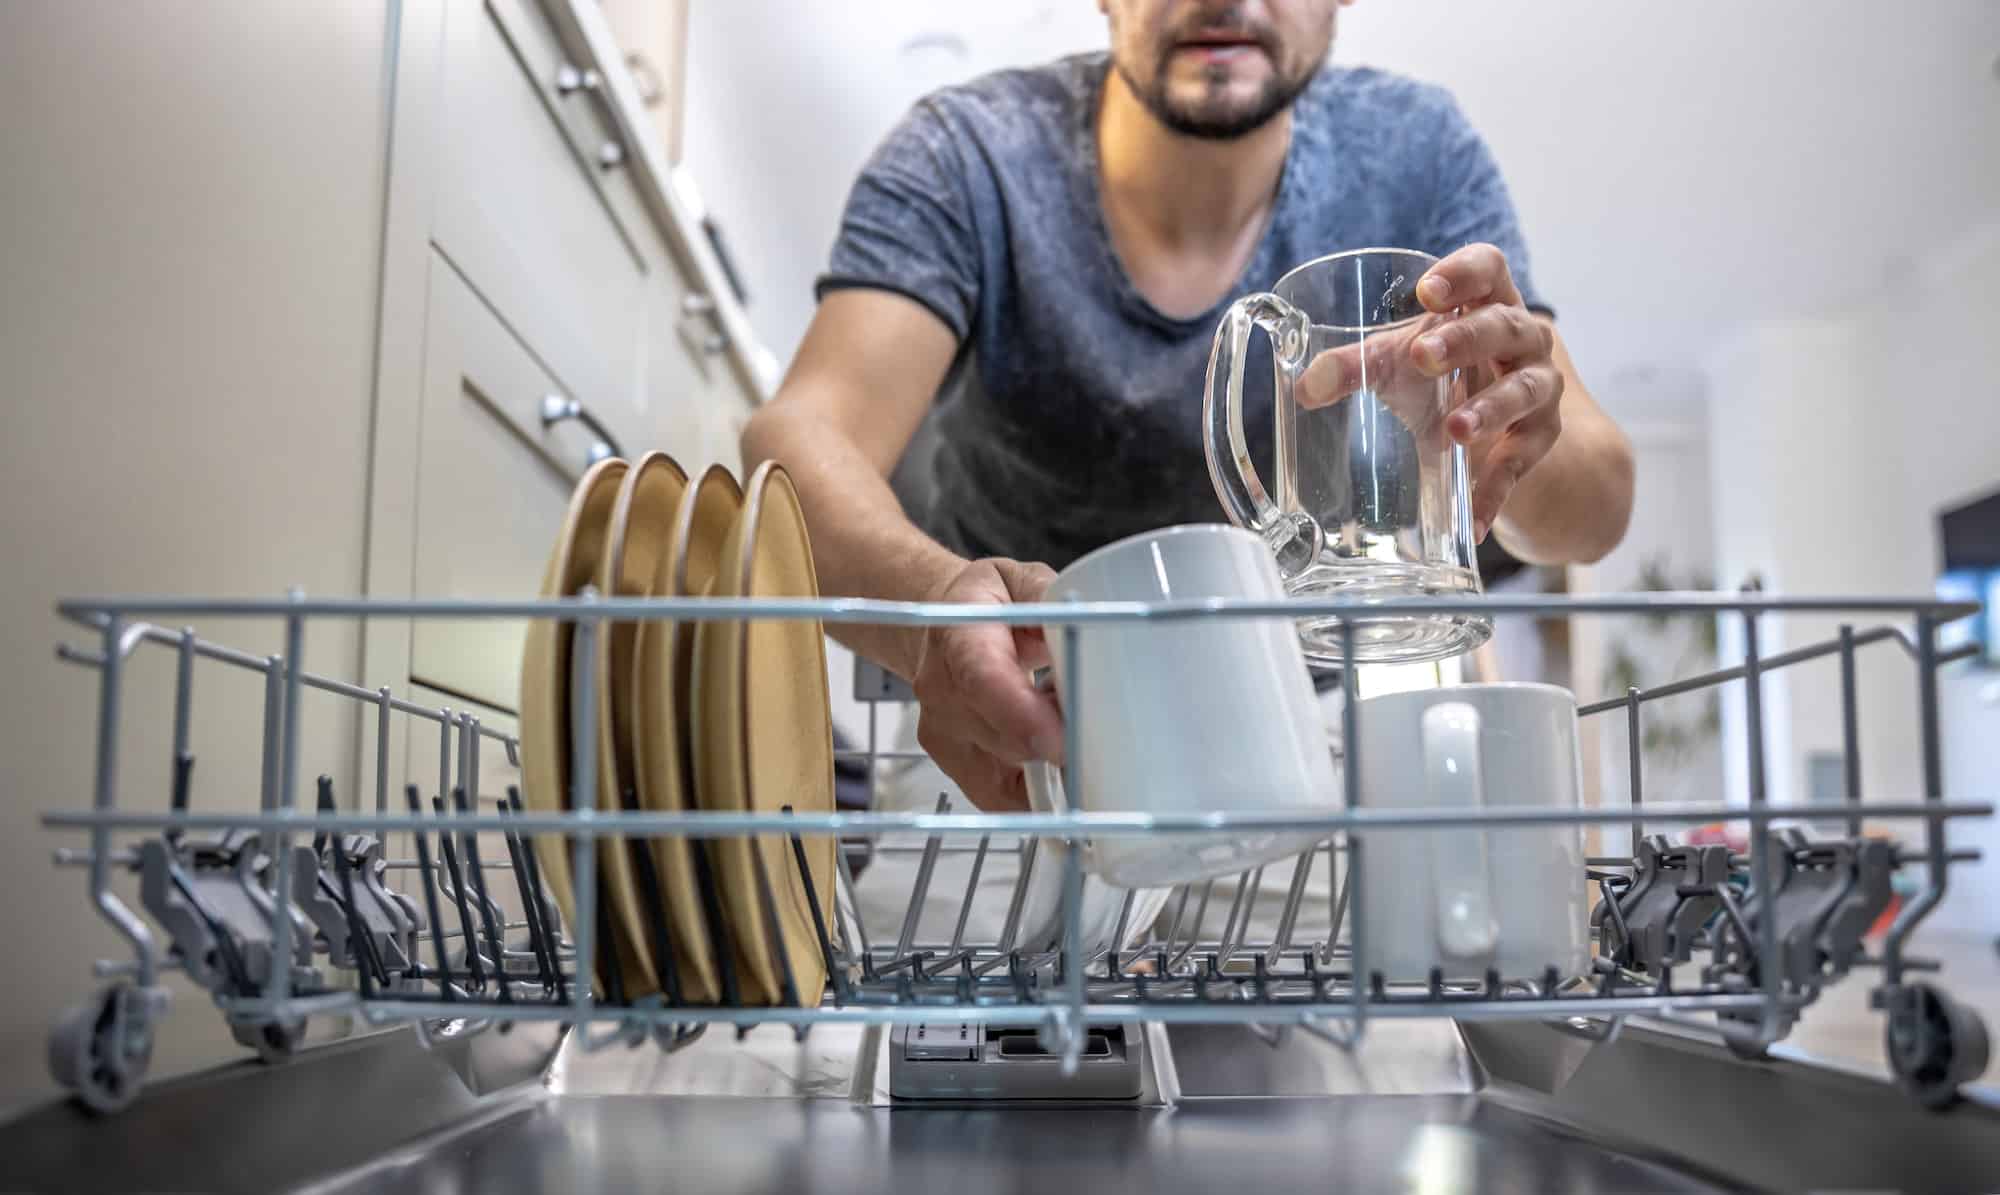 The man takes clean, washed dishes from the dishwasher.